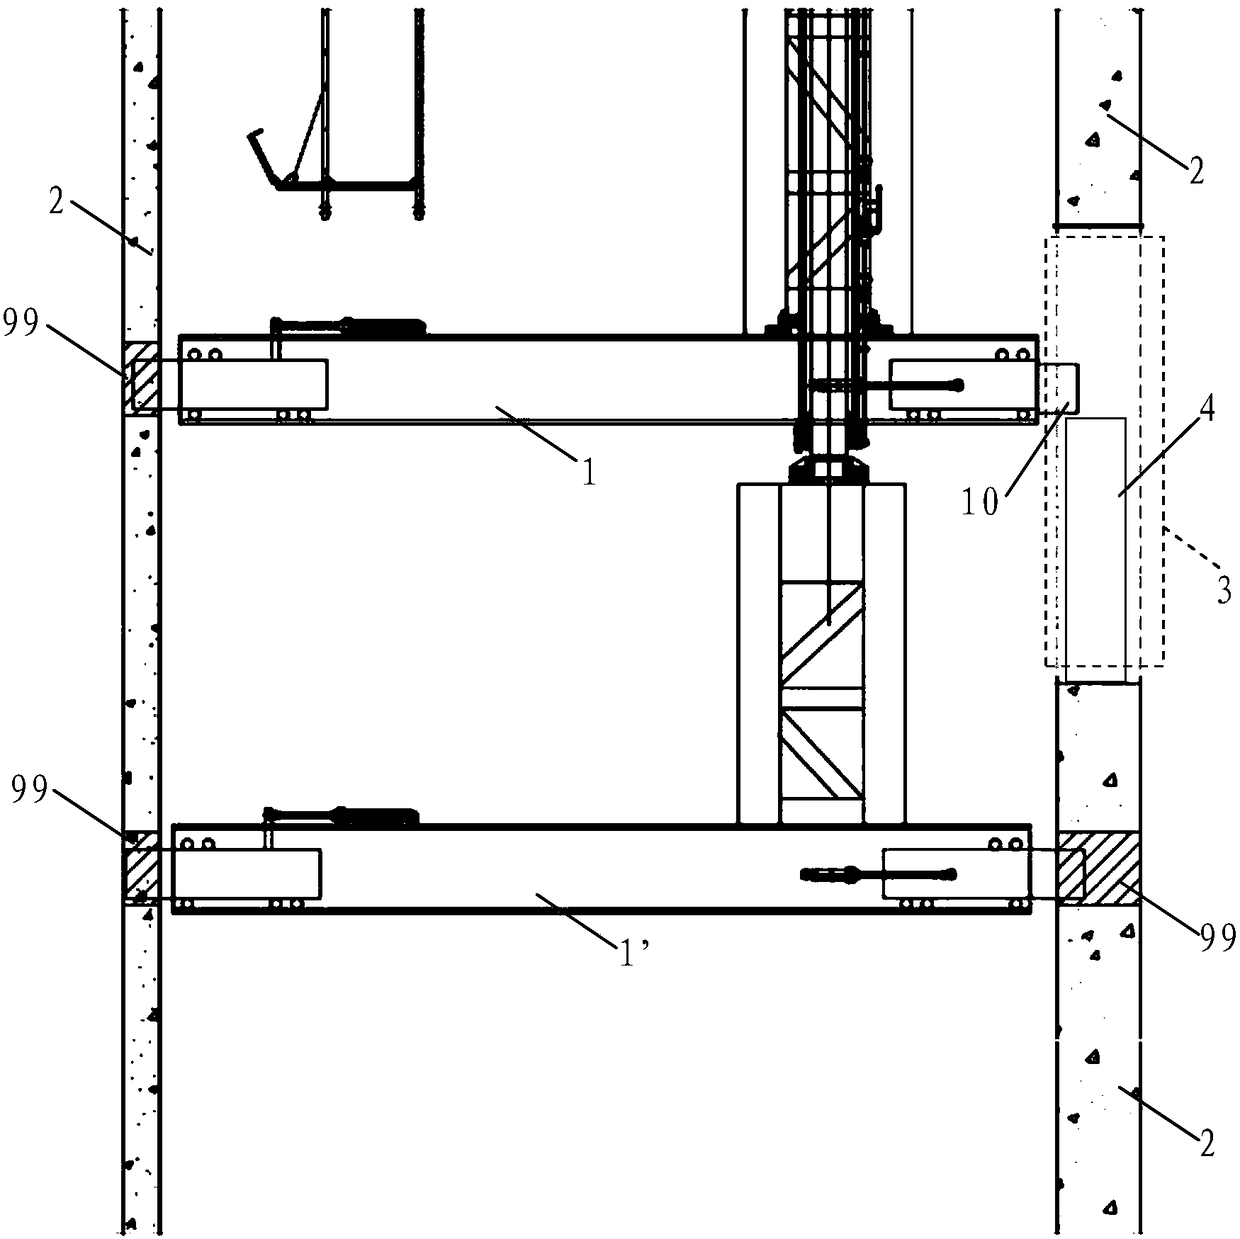 Jacking platform box girder support structure for super high-rise buildings and its construction method